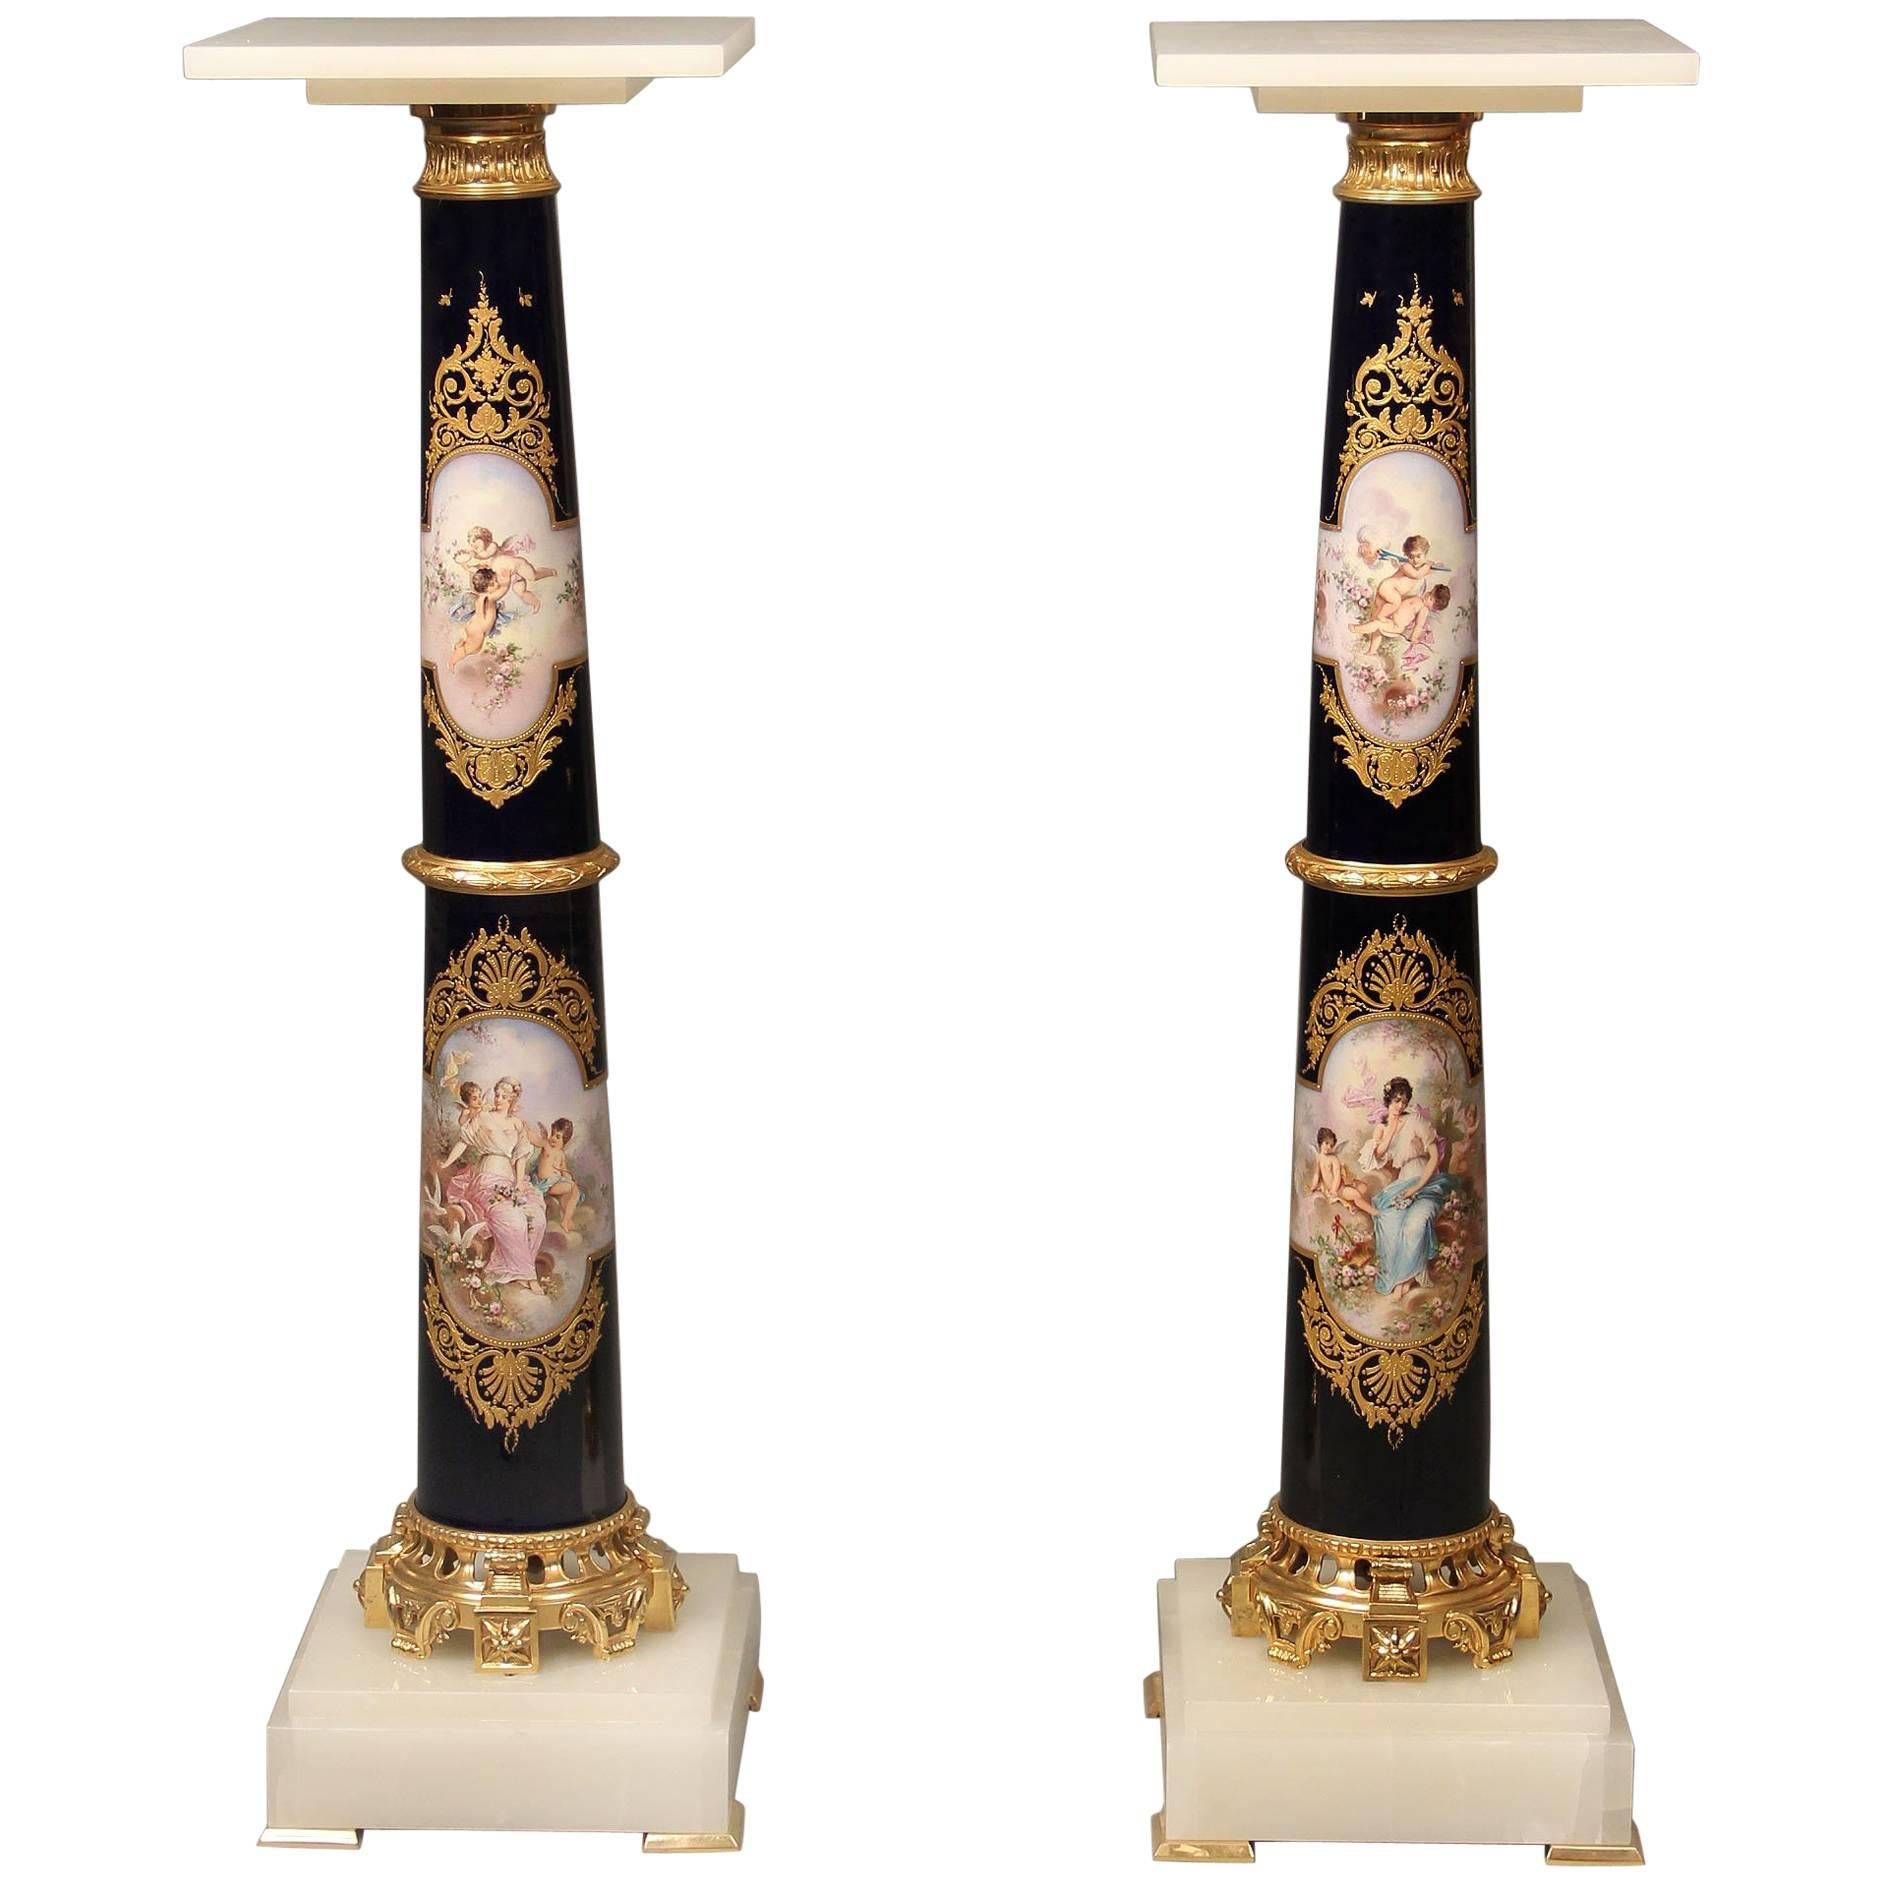 Exceptional Pair of Late 19th Century Gilt Bronze Mounted Sèvres Pedestals For Sale